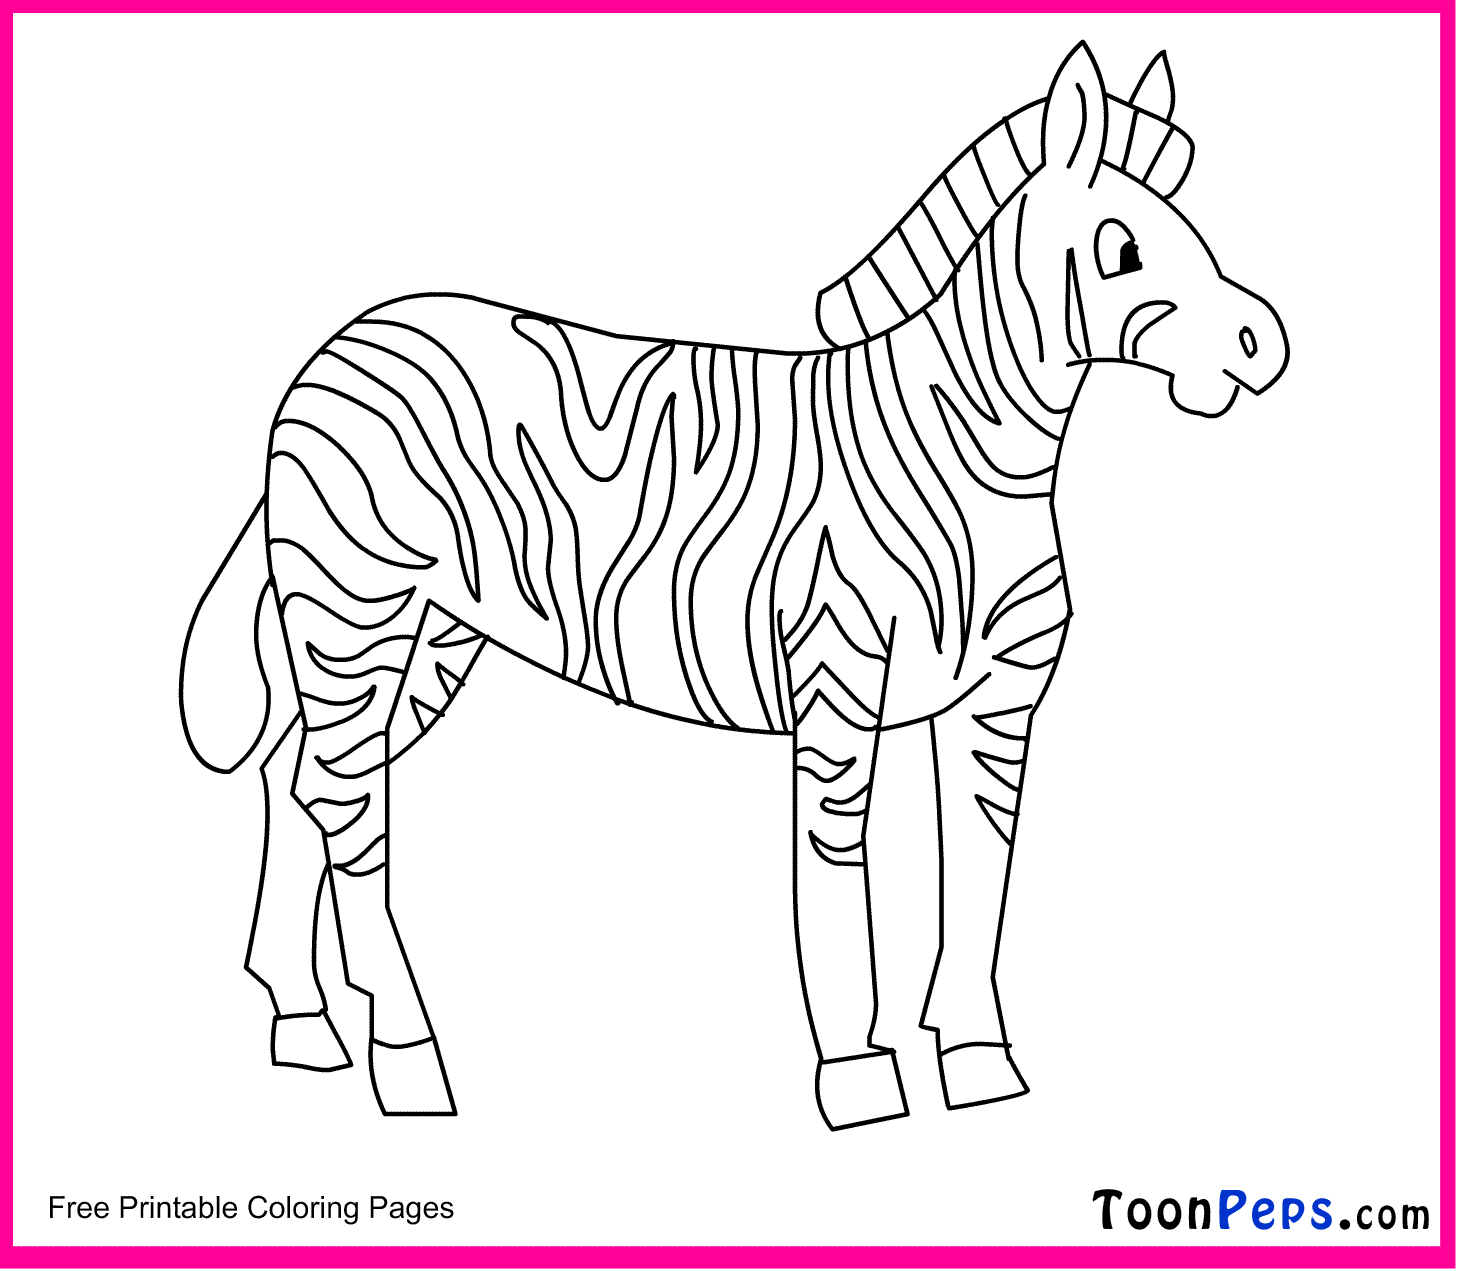 Toonpeps free printable pages. Clipart zebra coloring